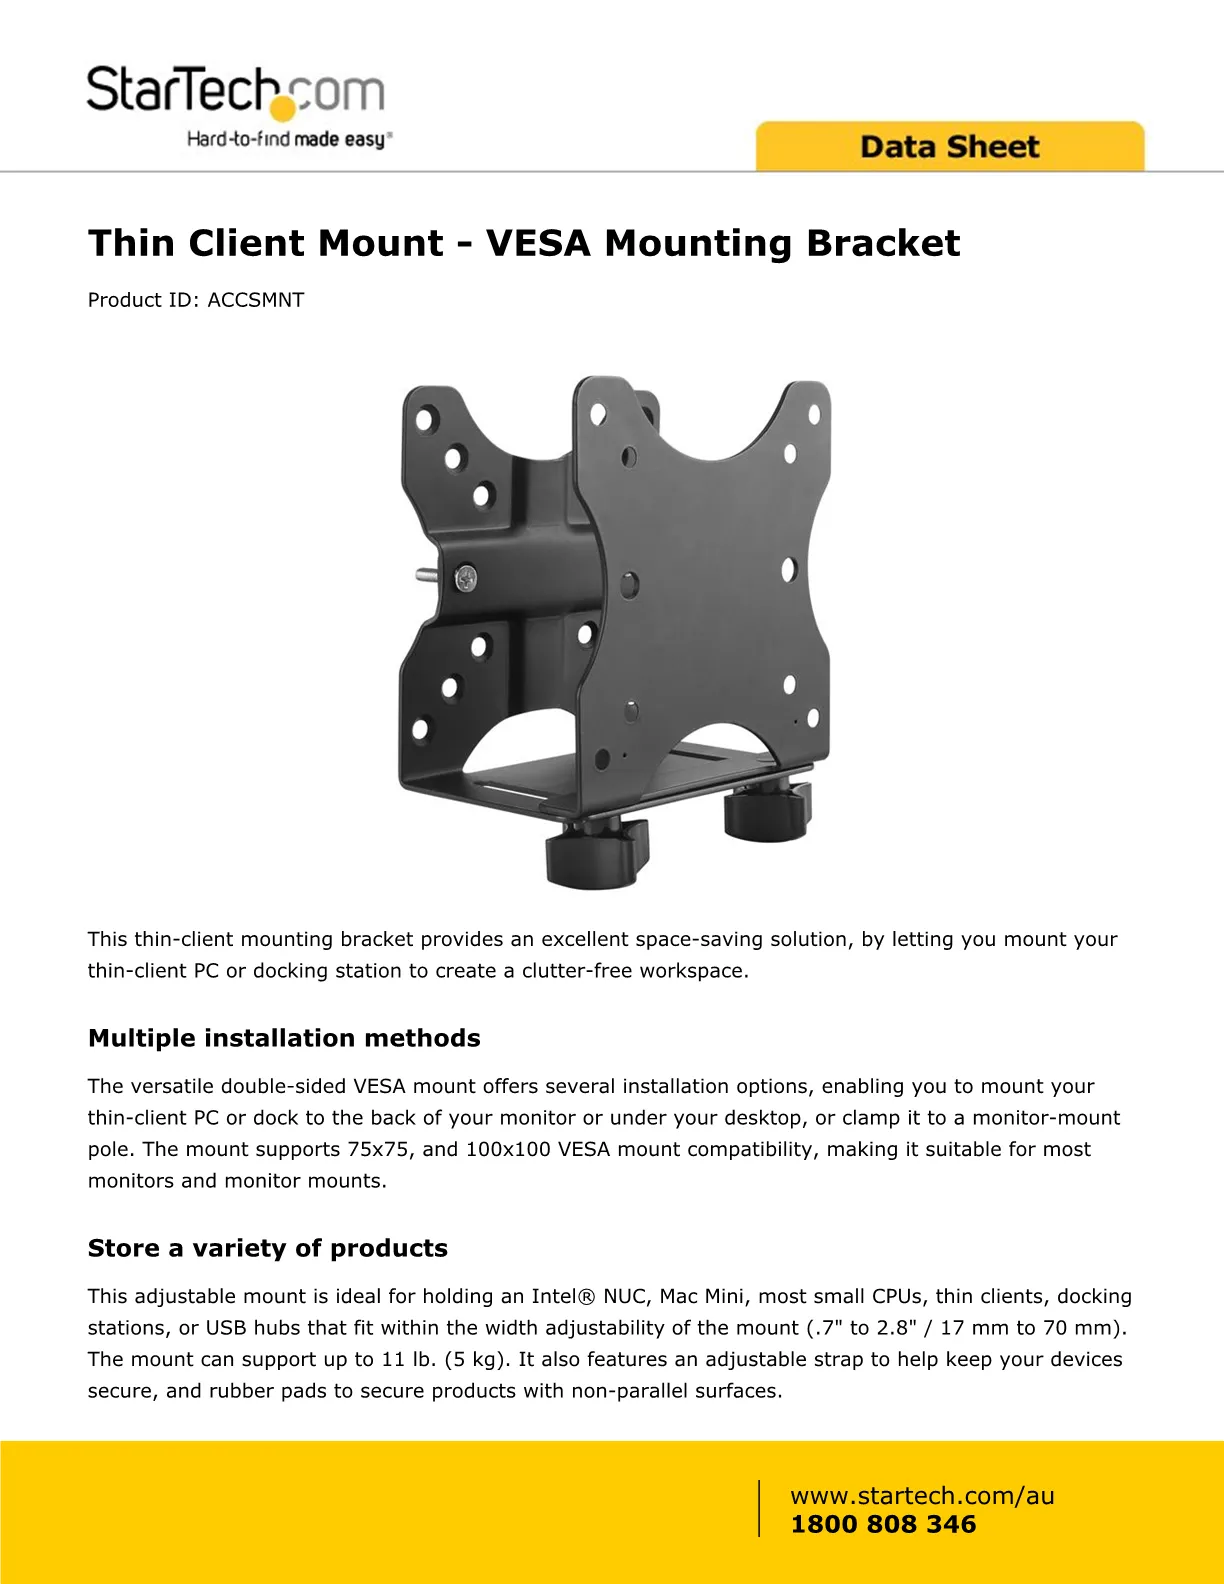 Product  StarTech.com Thin Client Mount - Mini PC VESA Mount - Adjustable  .7 to 2.8 - Under Desk Computer Mount - Mac Mini Monitor Mount (ACCSMNT)  mounting component - for thin client - black